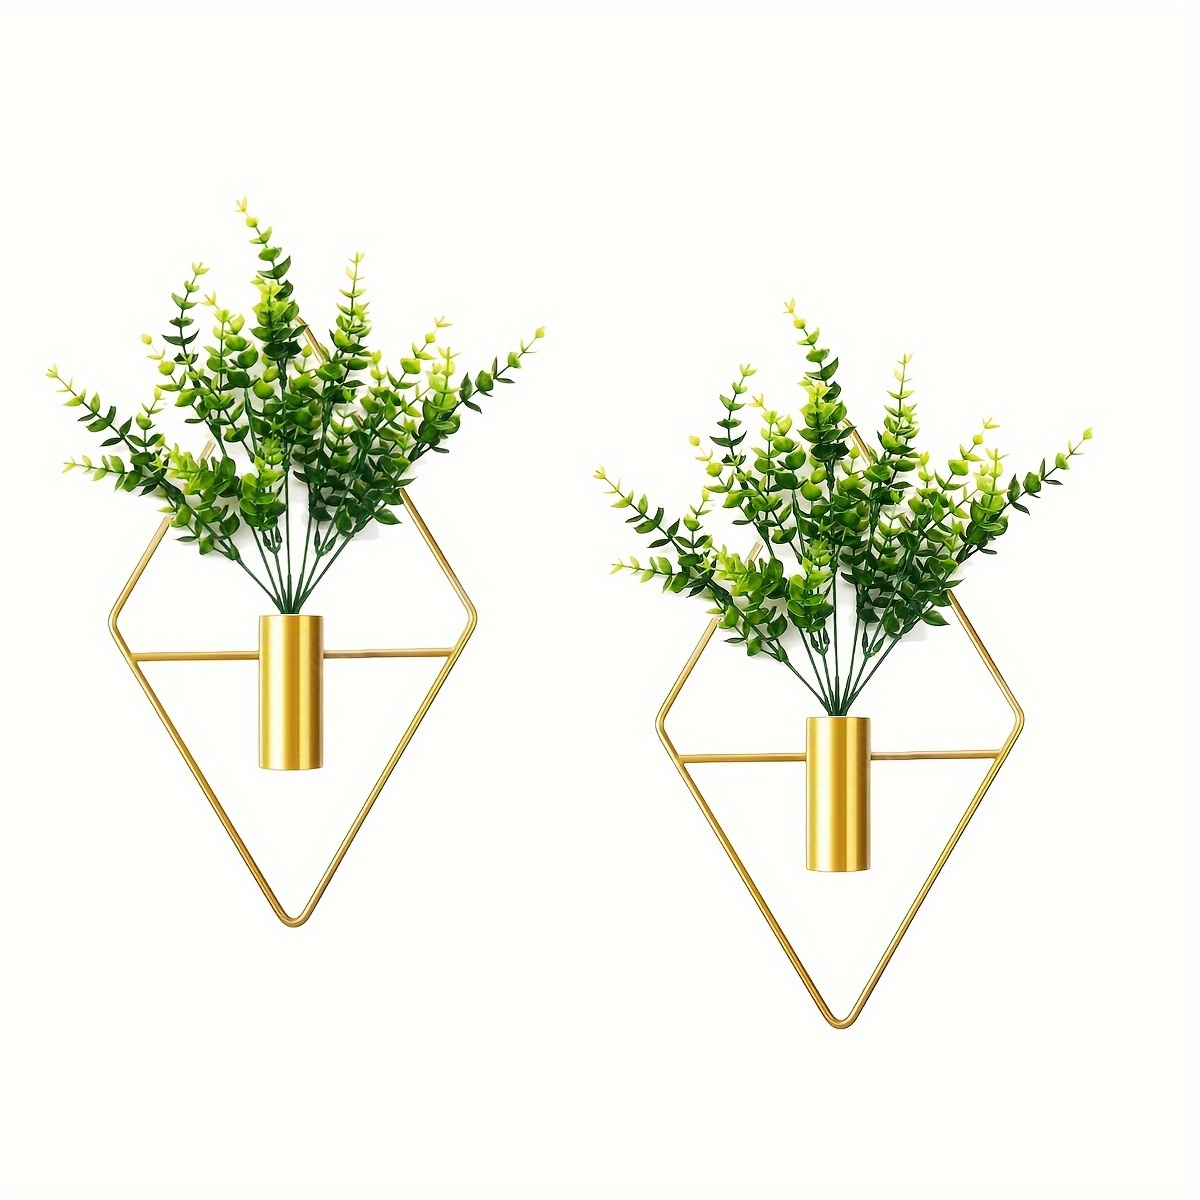 

2pcs, Diamond Shape Hanging Planters With Artificial Aquatic Plants Metal Vase Indoor Holder Modern Geometric Wall Decor For Home Living Room Office